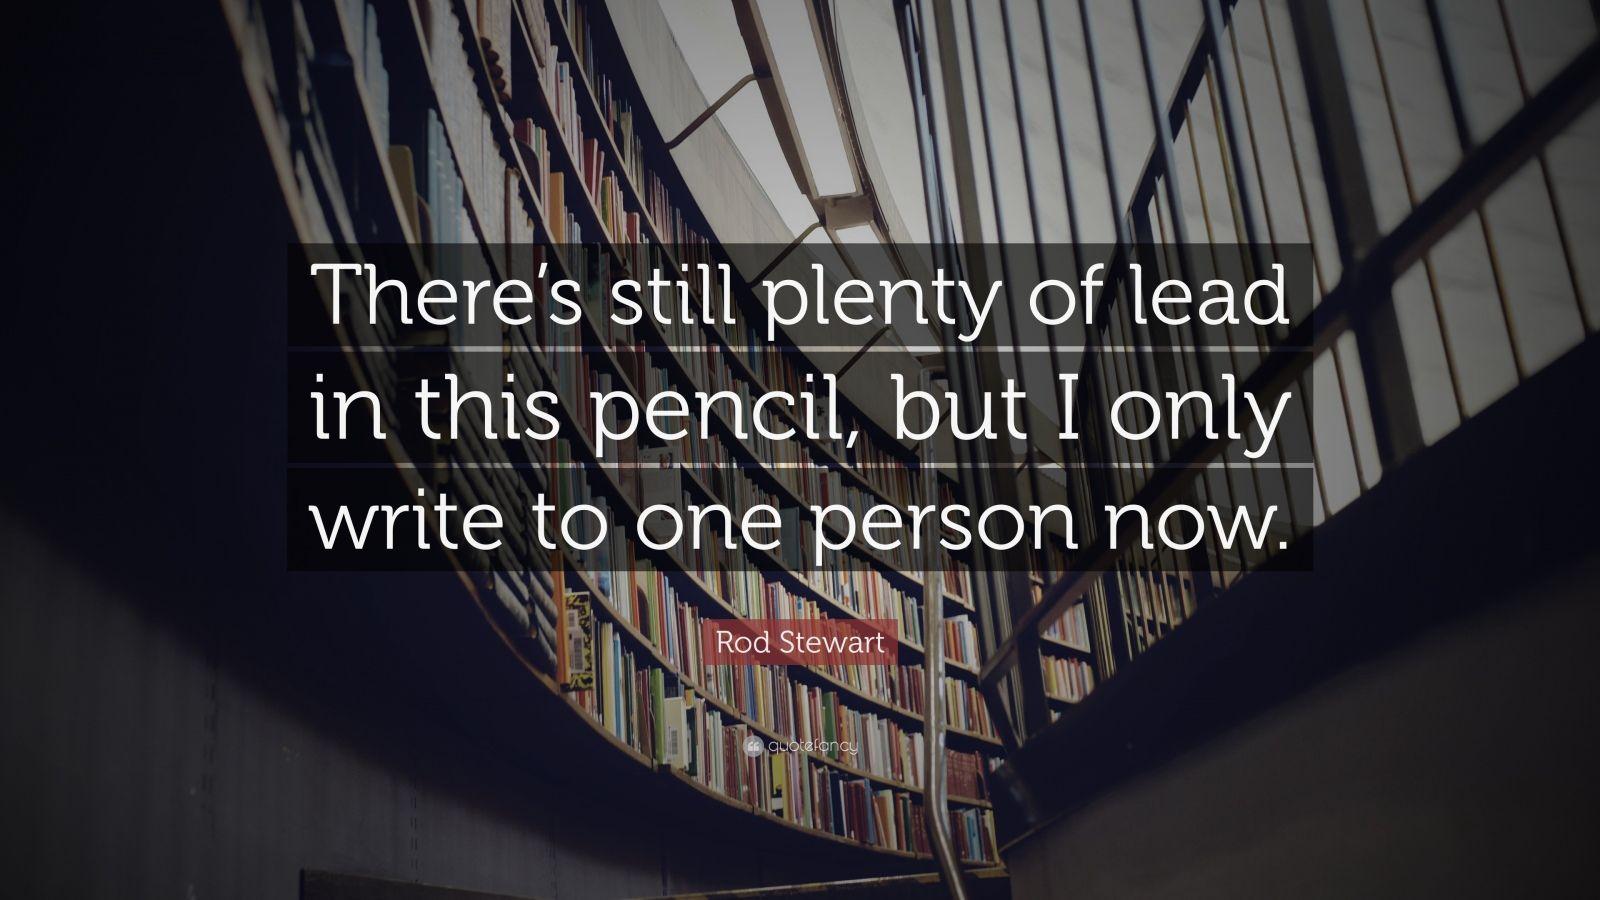 Rod Stewart Quote: “There's still plenty of lead in this pencil